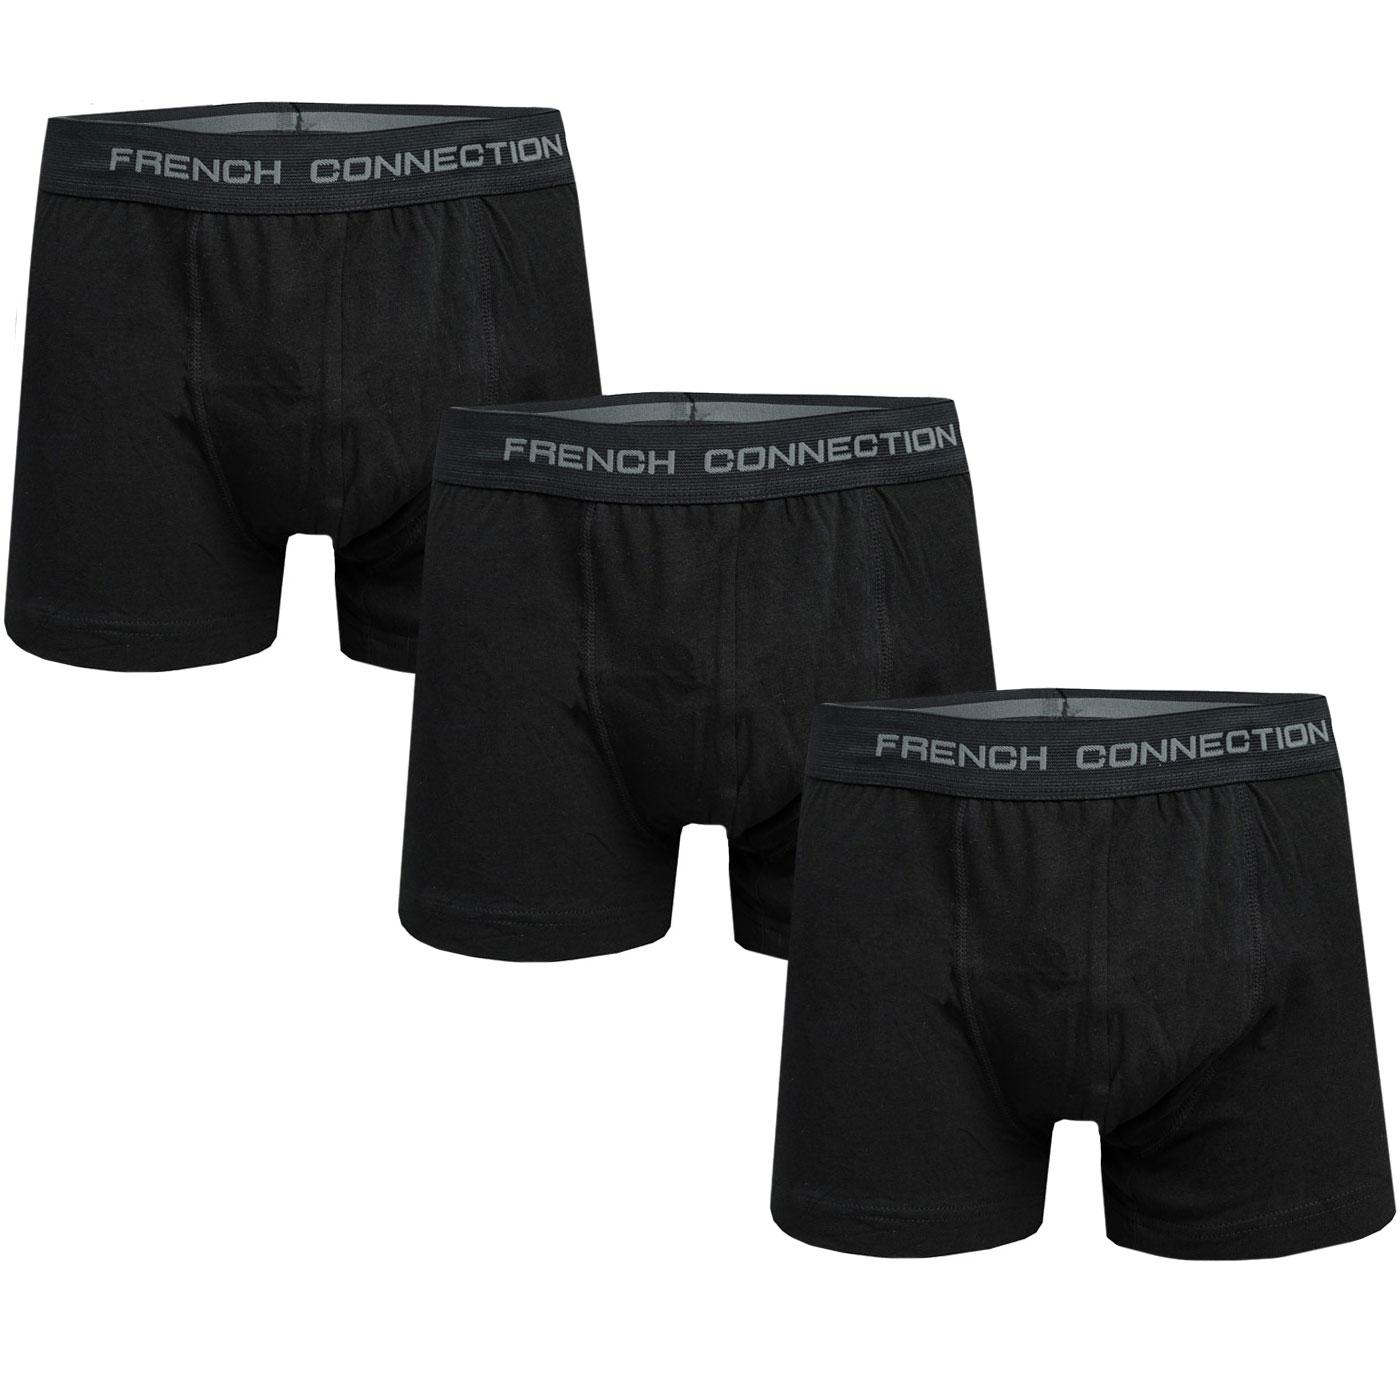 FRENCH CONNECTION 3 Pack Signature Boxer Shorts Black